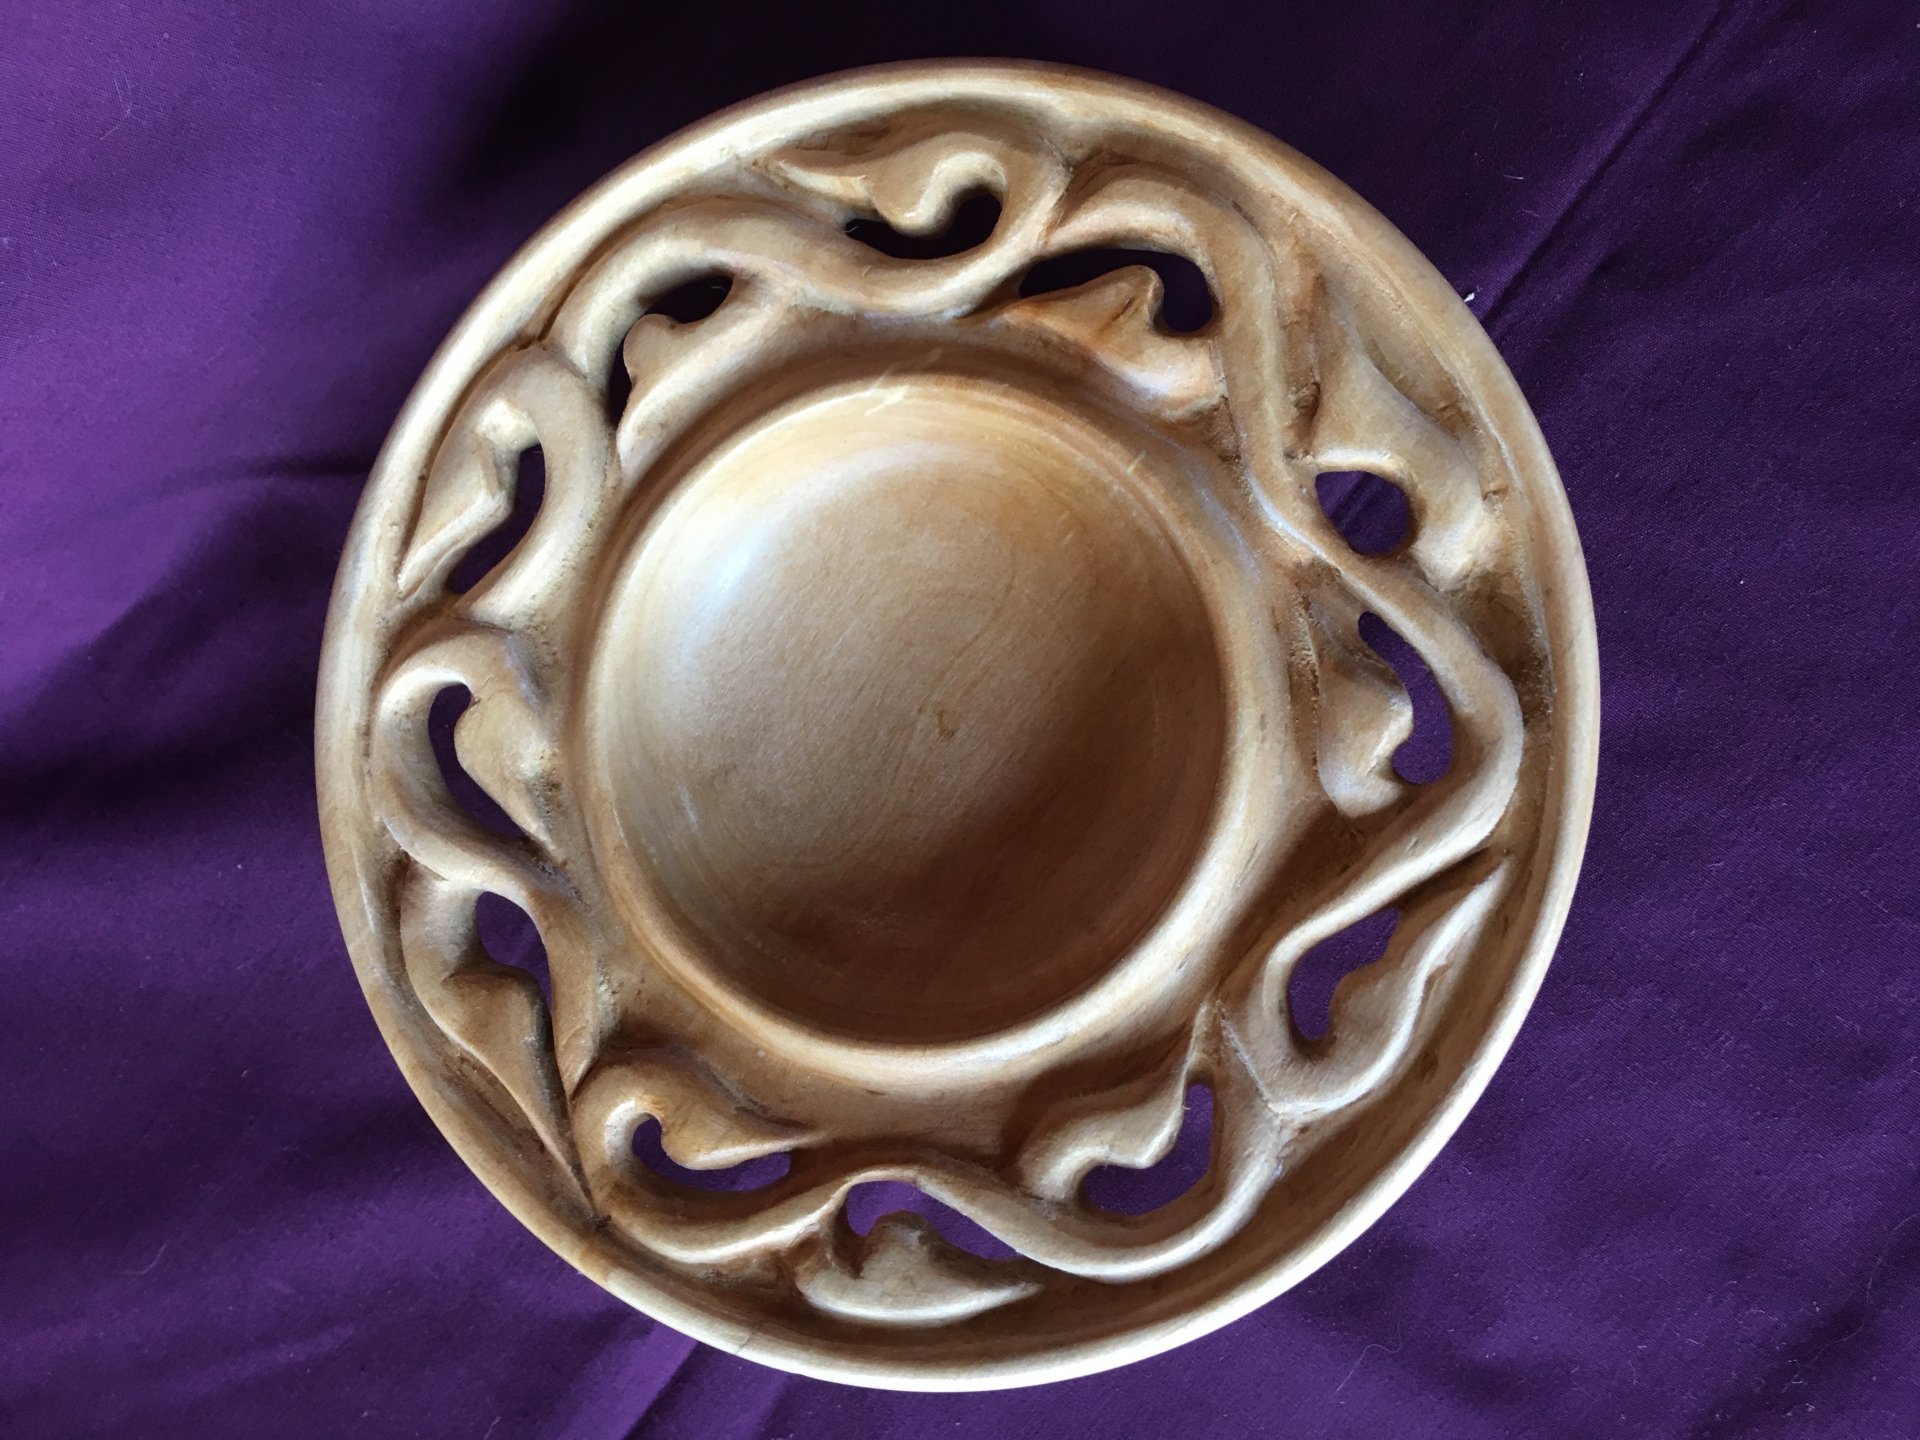 vined bowl top view